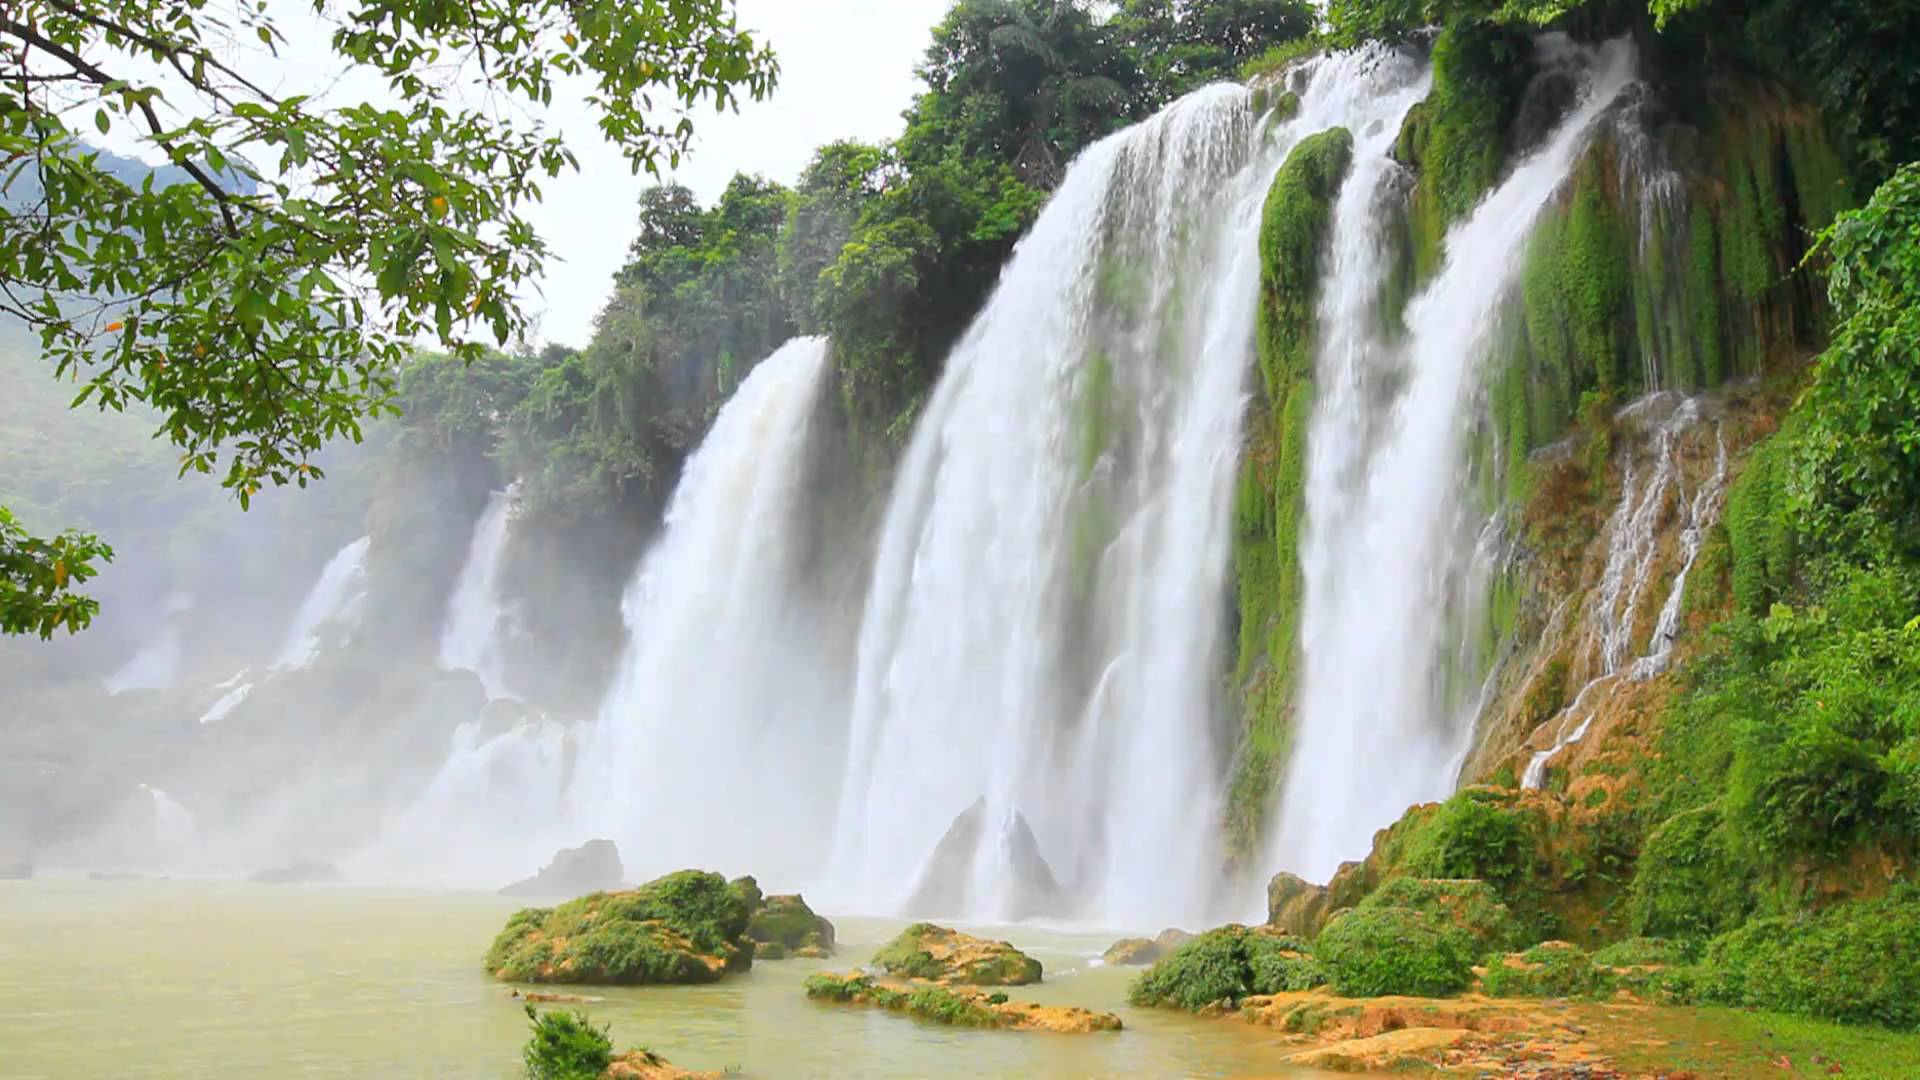 Animated Wallpaper and Desktop Backgrounds Waterfalls HD.mpg - YouTube